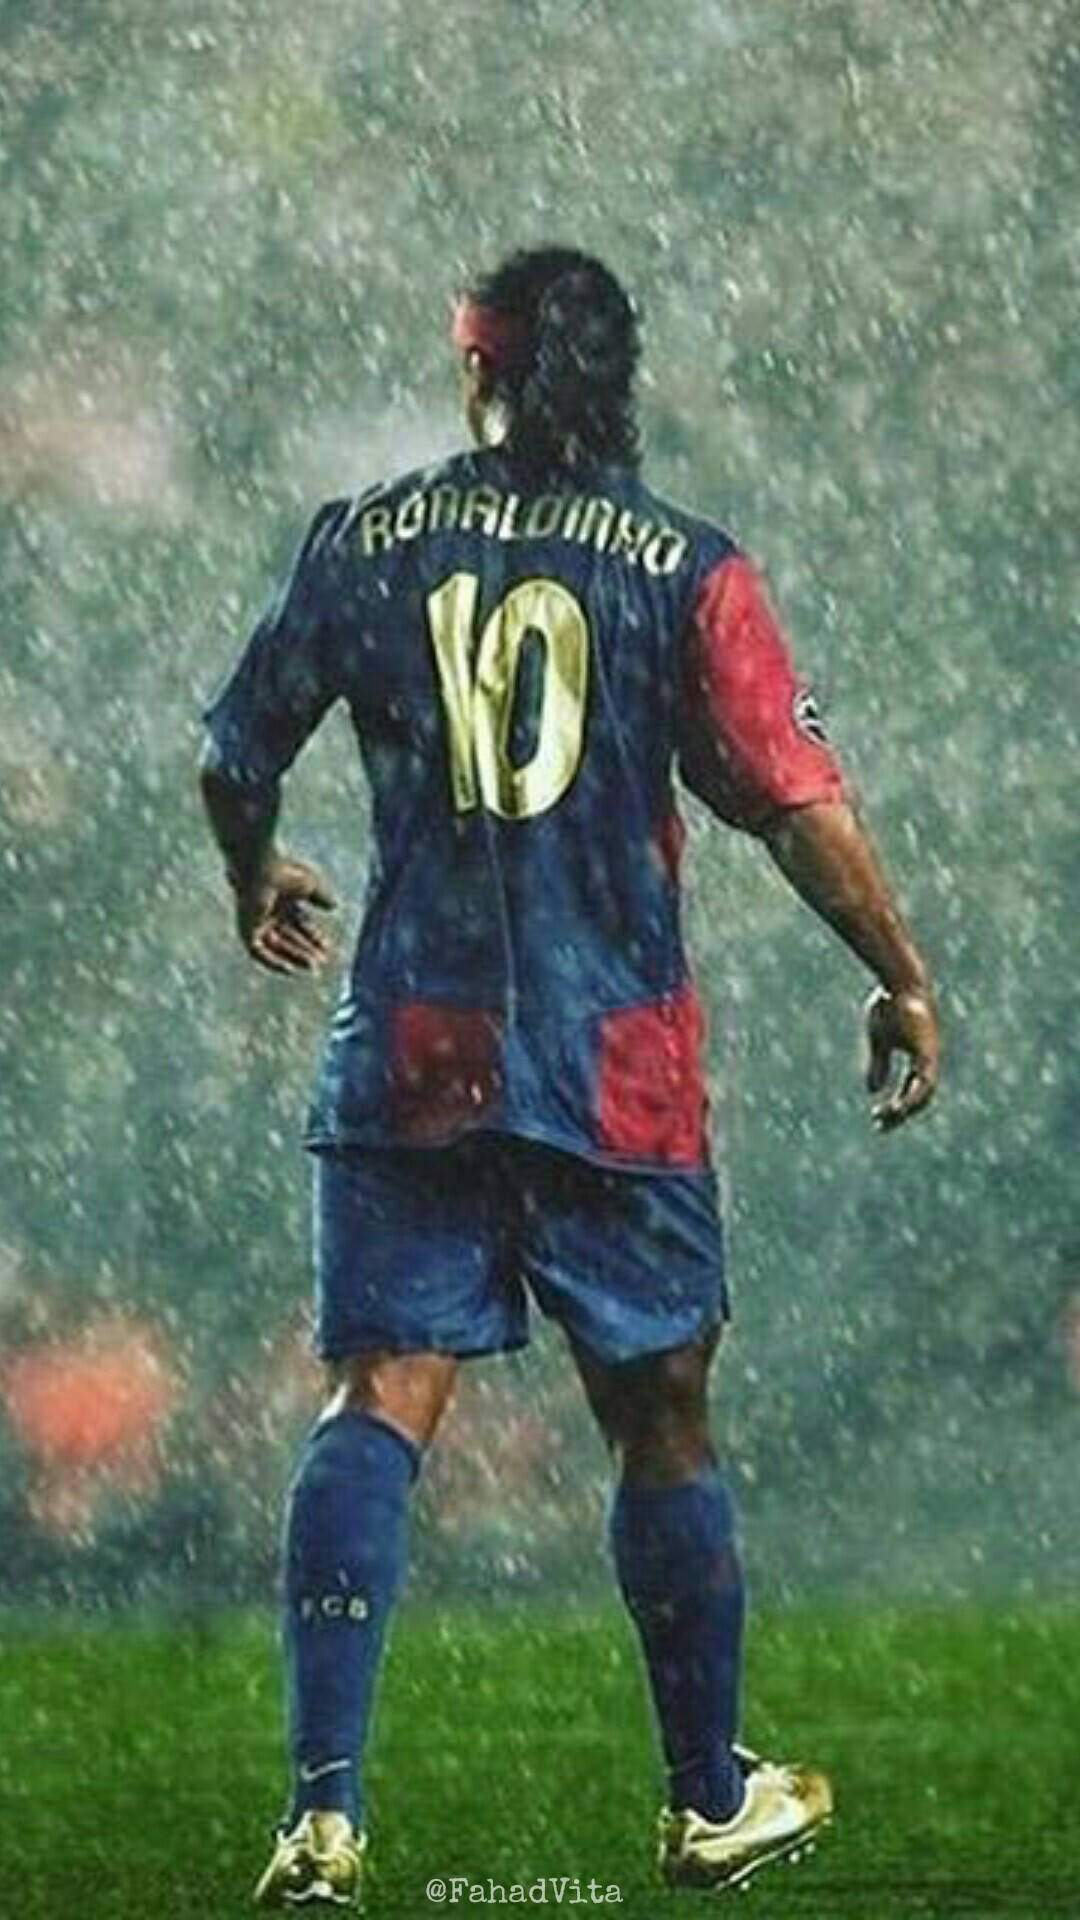 Ronaldinho In Action During The Football Match Background